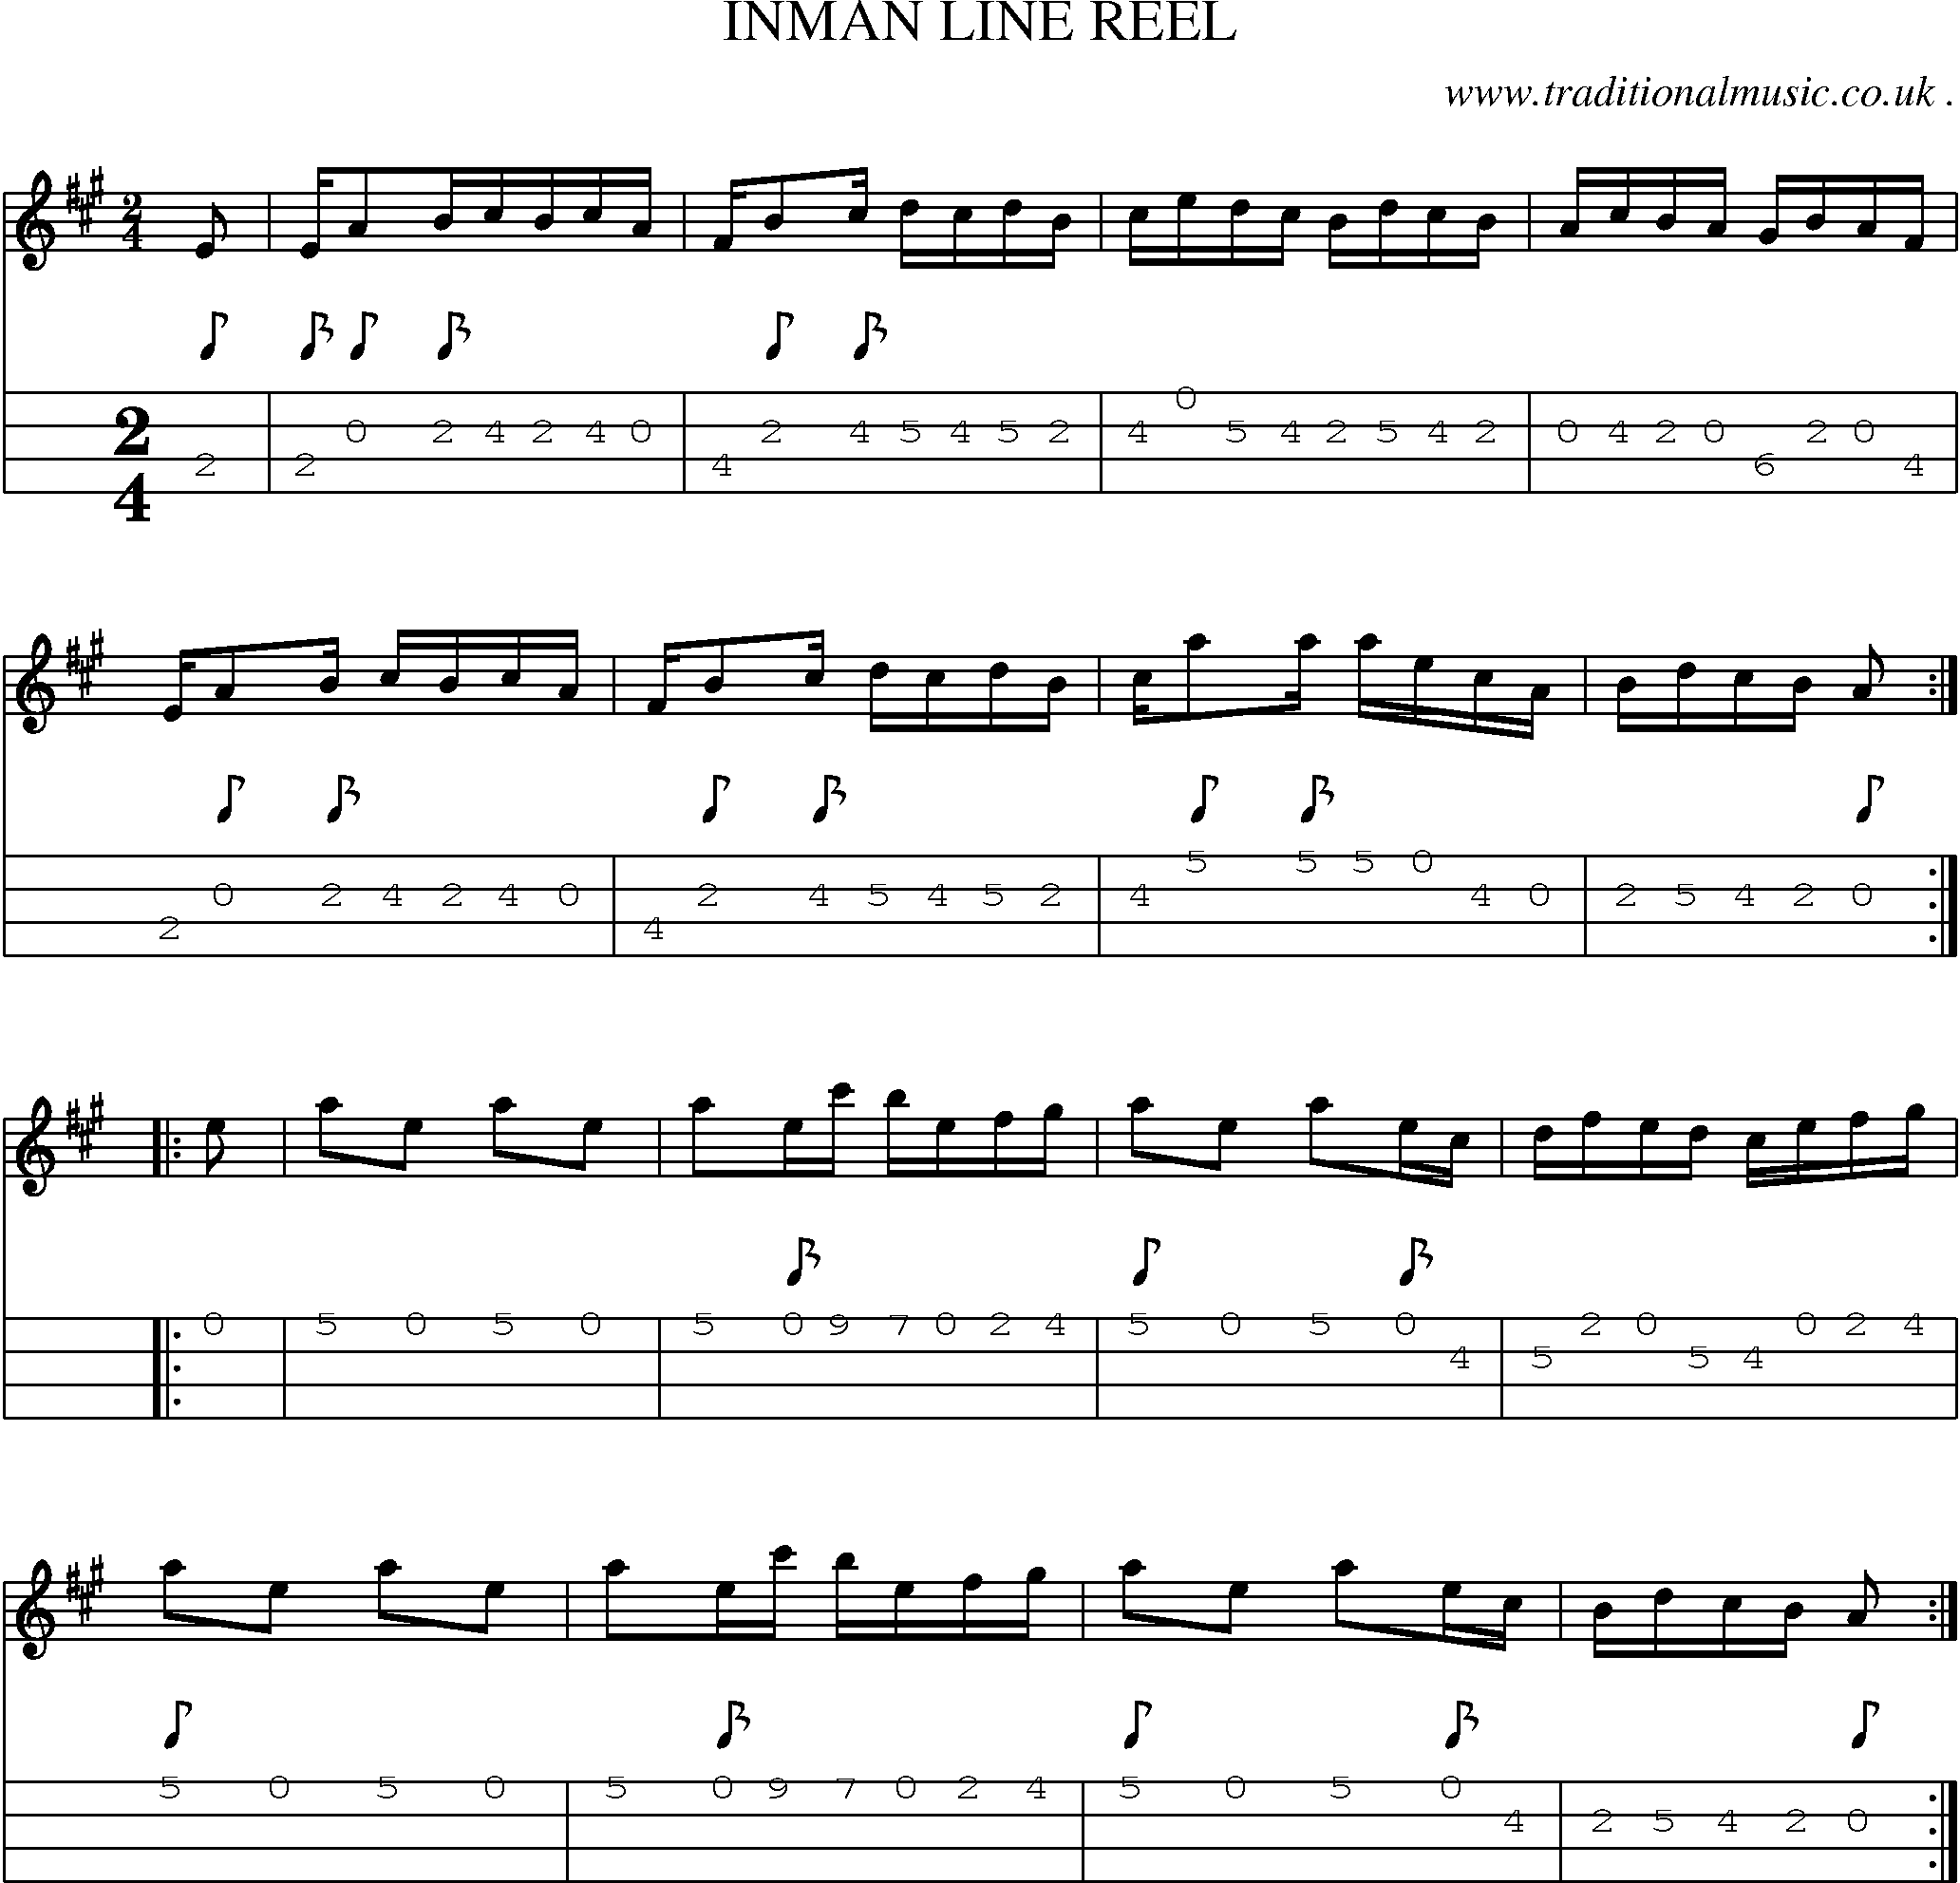 Sheet-Music and Mandolin Tabs for Inman Line Reel